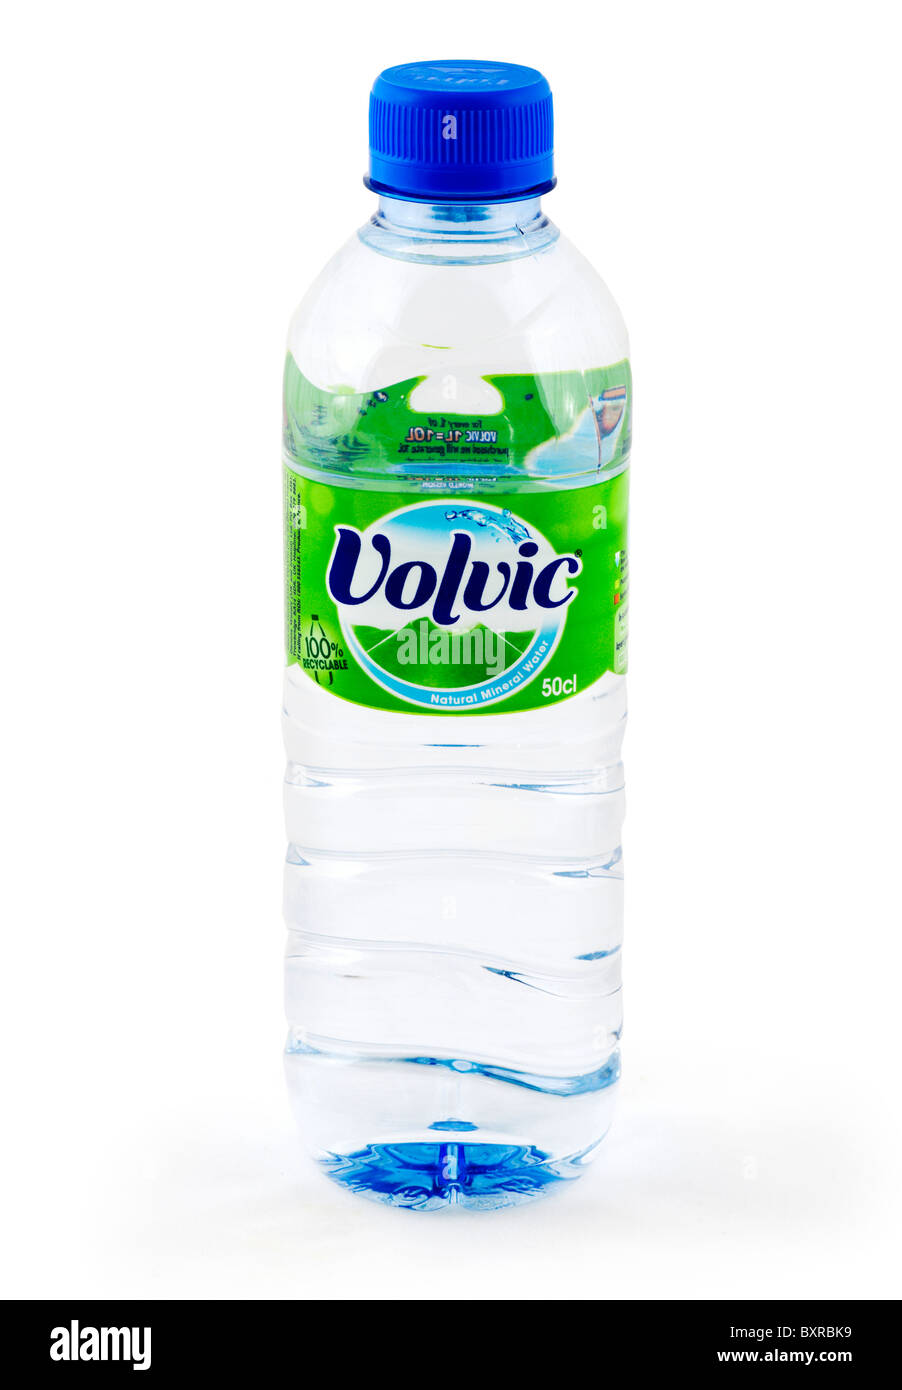 Bottle of Volvic natural mineral water, UK Stock Photo